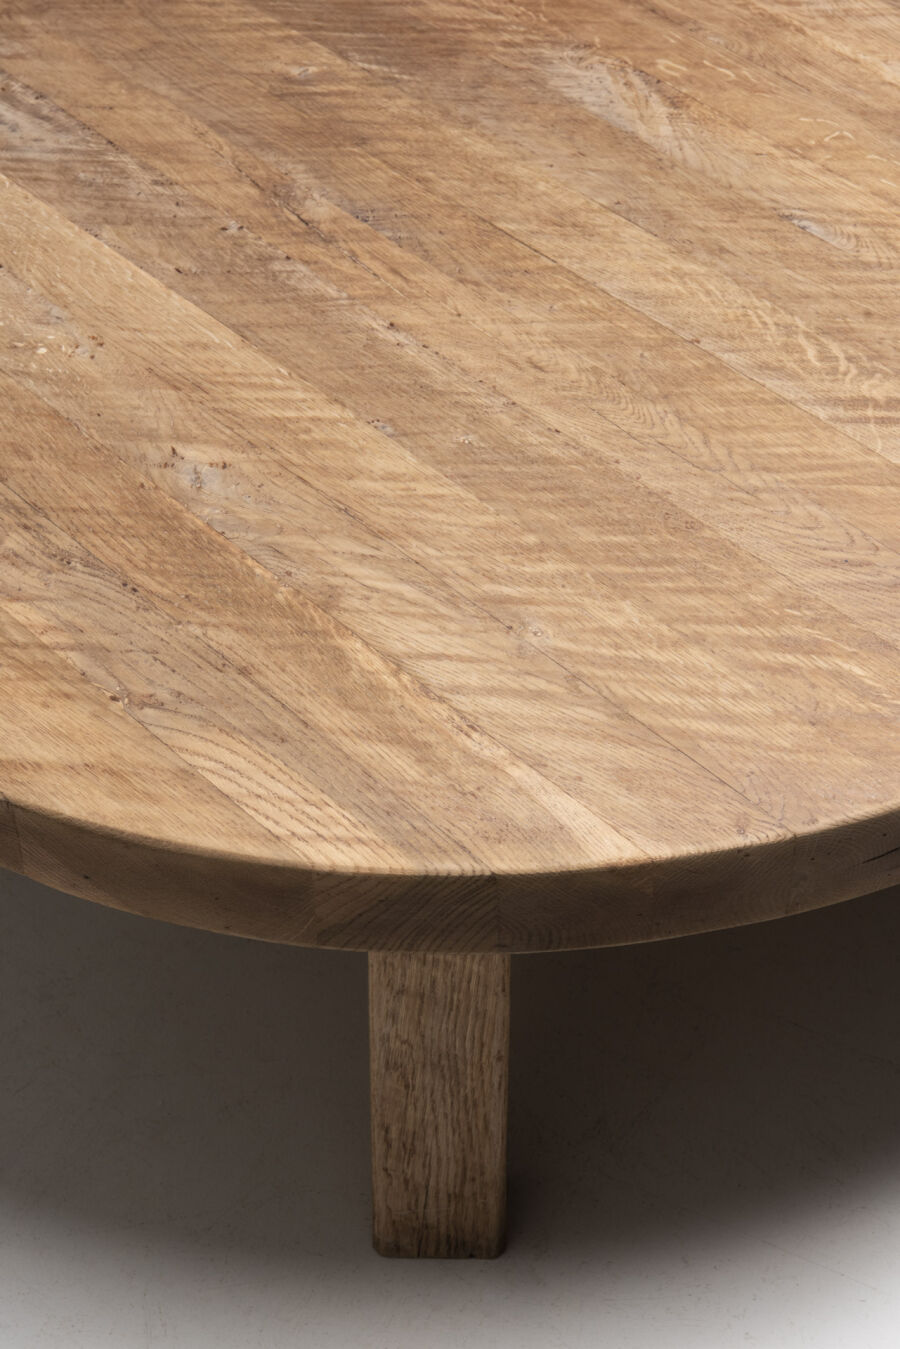 3157solid-oak-round-table-1